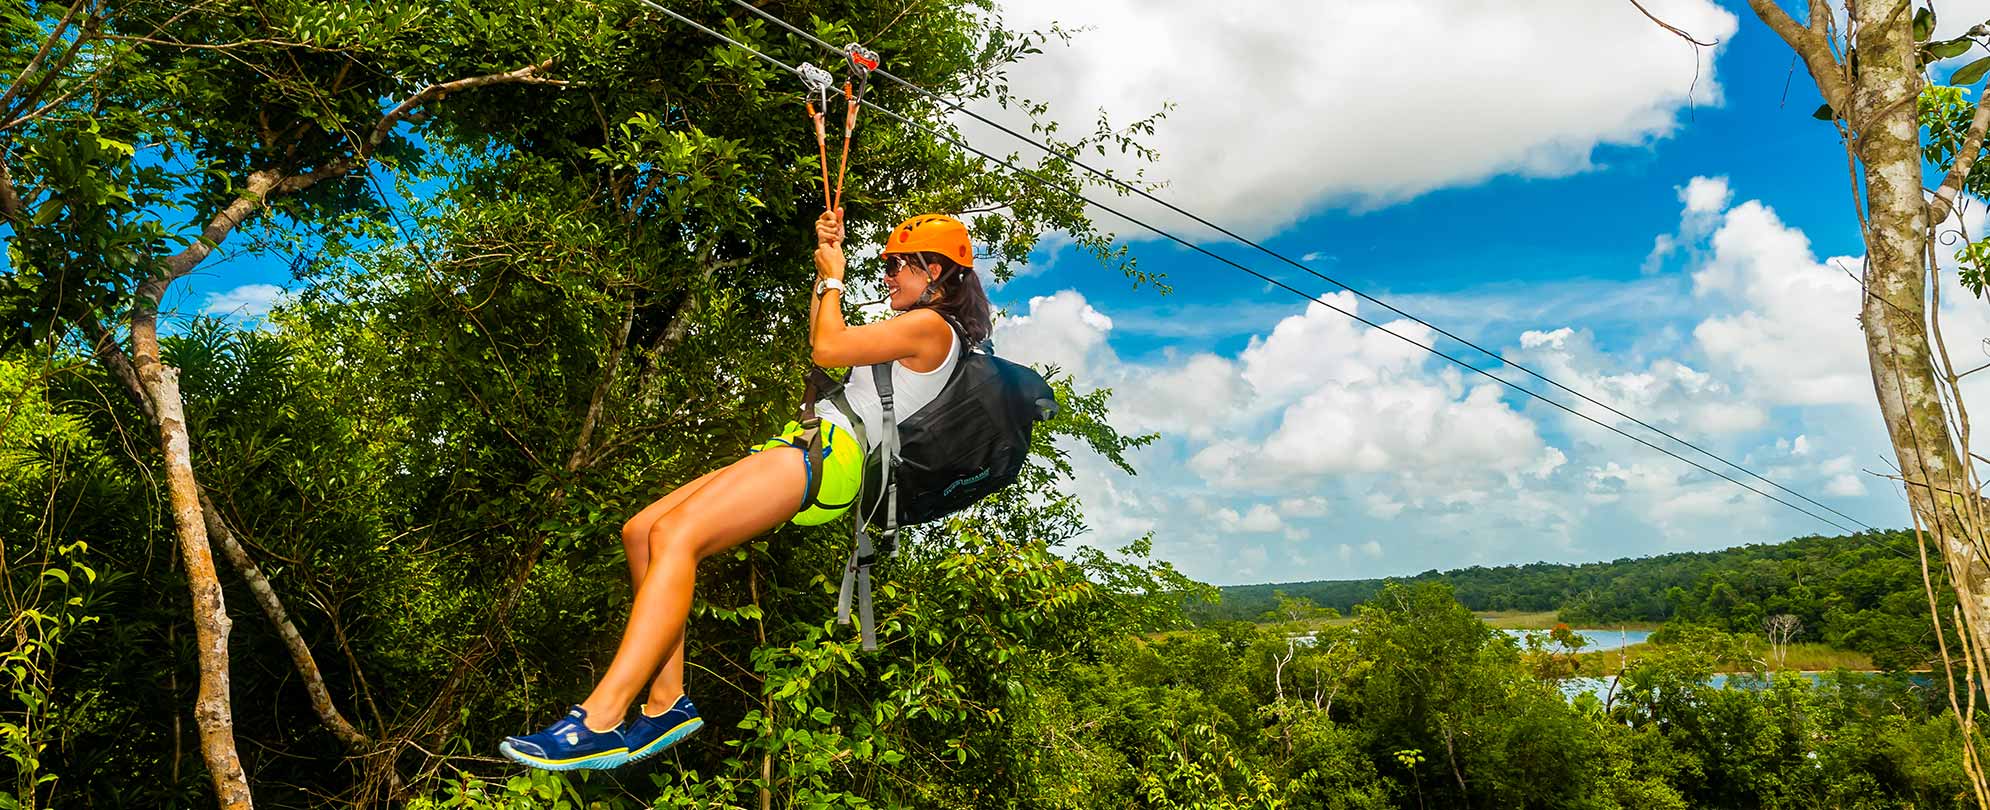 A woman ziplines through the trees at Toro Verde Adventure Park, a top thing to do in Puerto Rico.